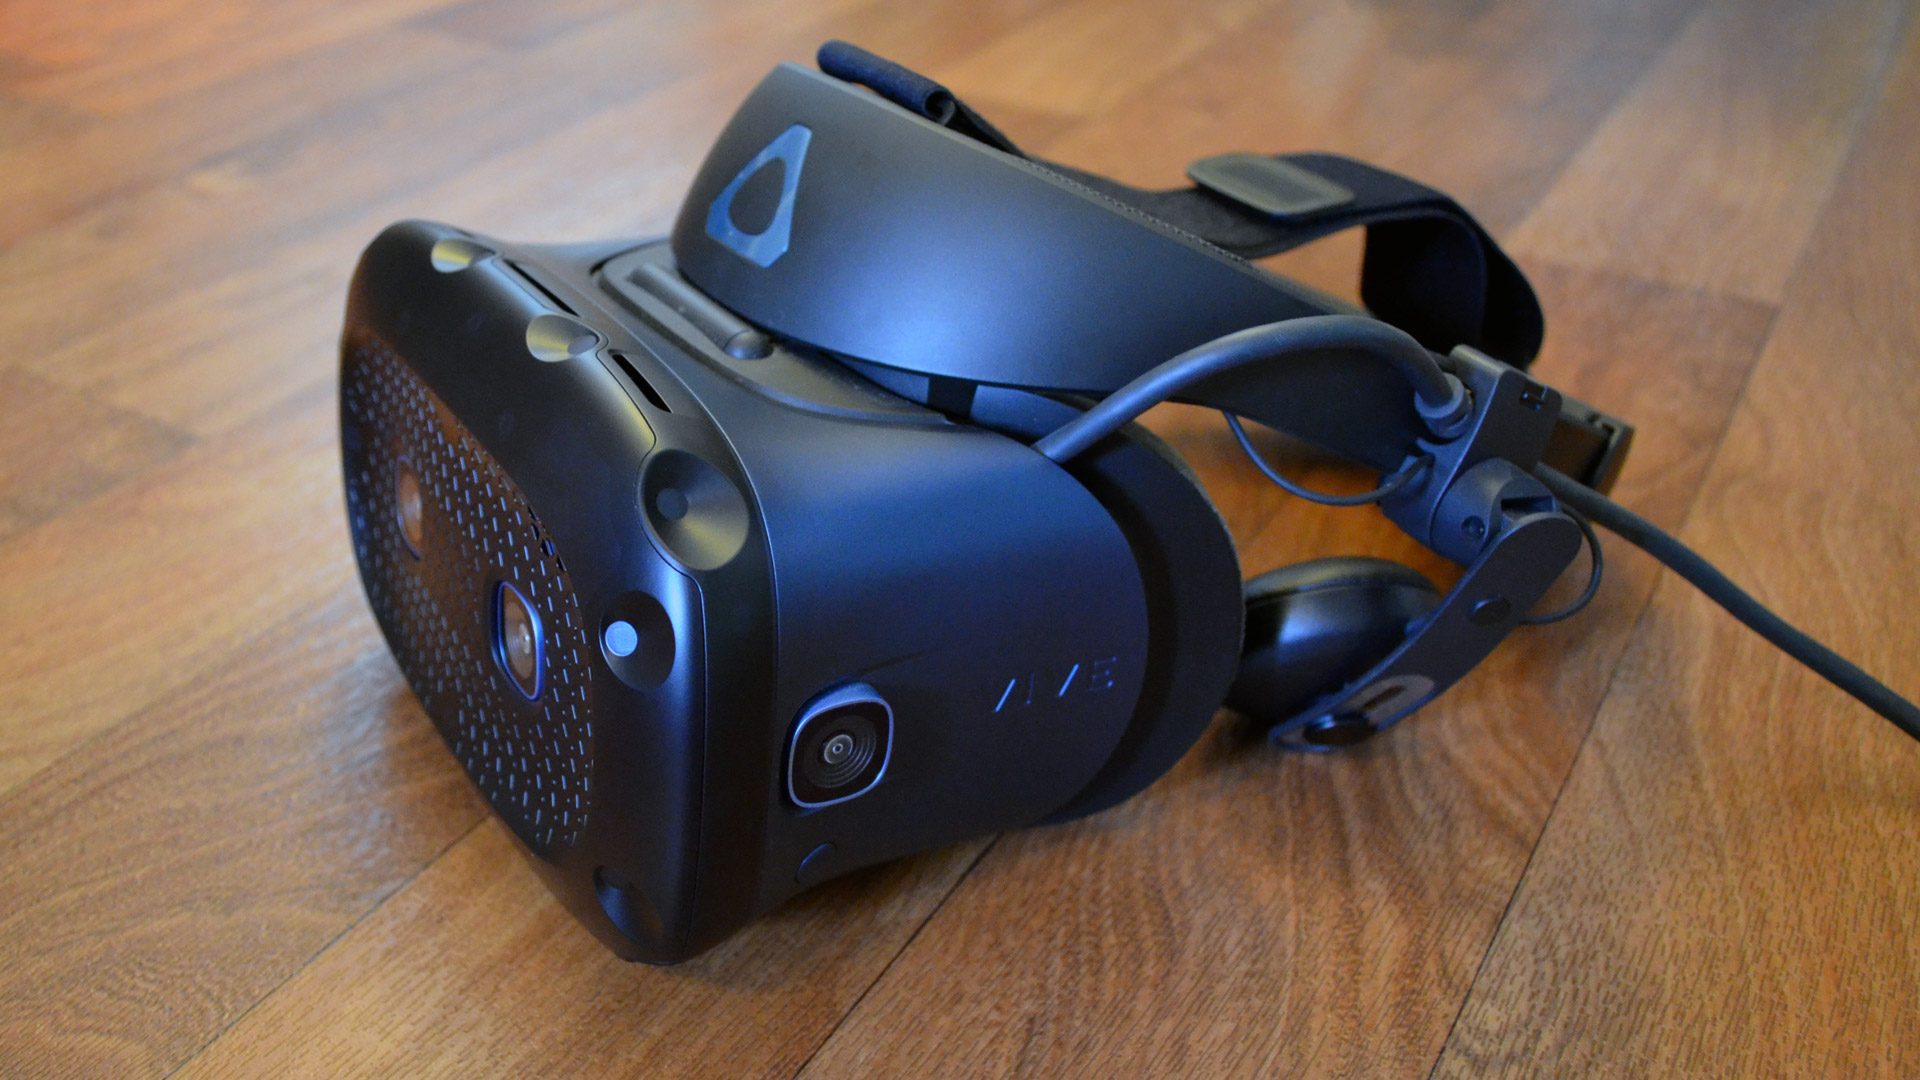 Vive Cosmos Elite & External Tracking Faceplate Review – Cosmos